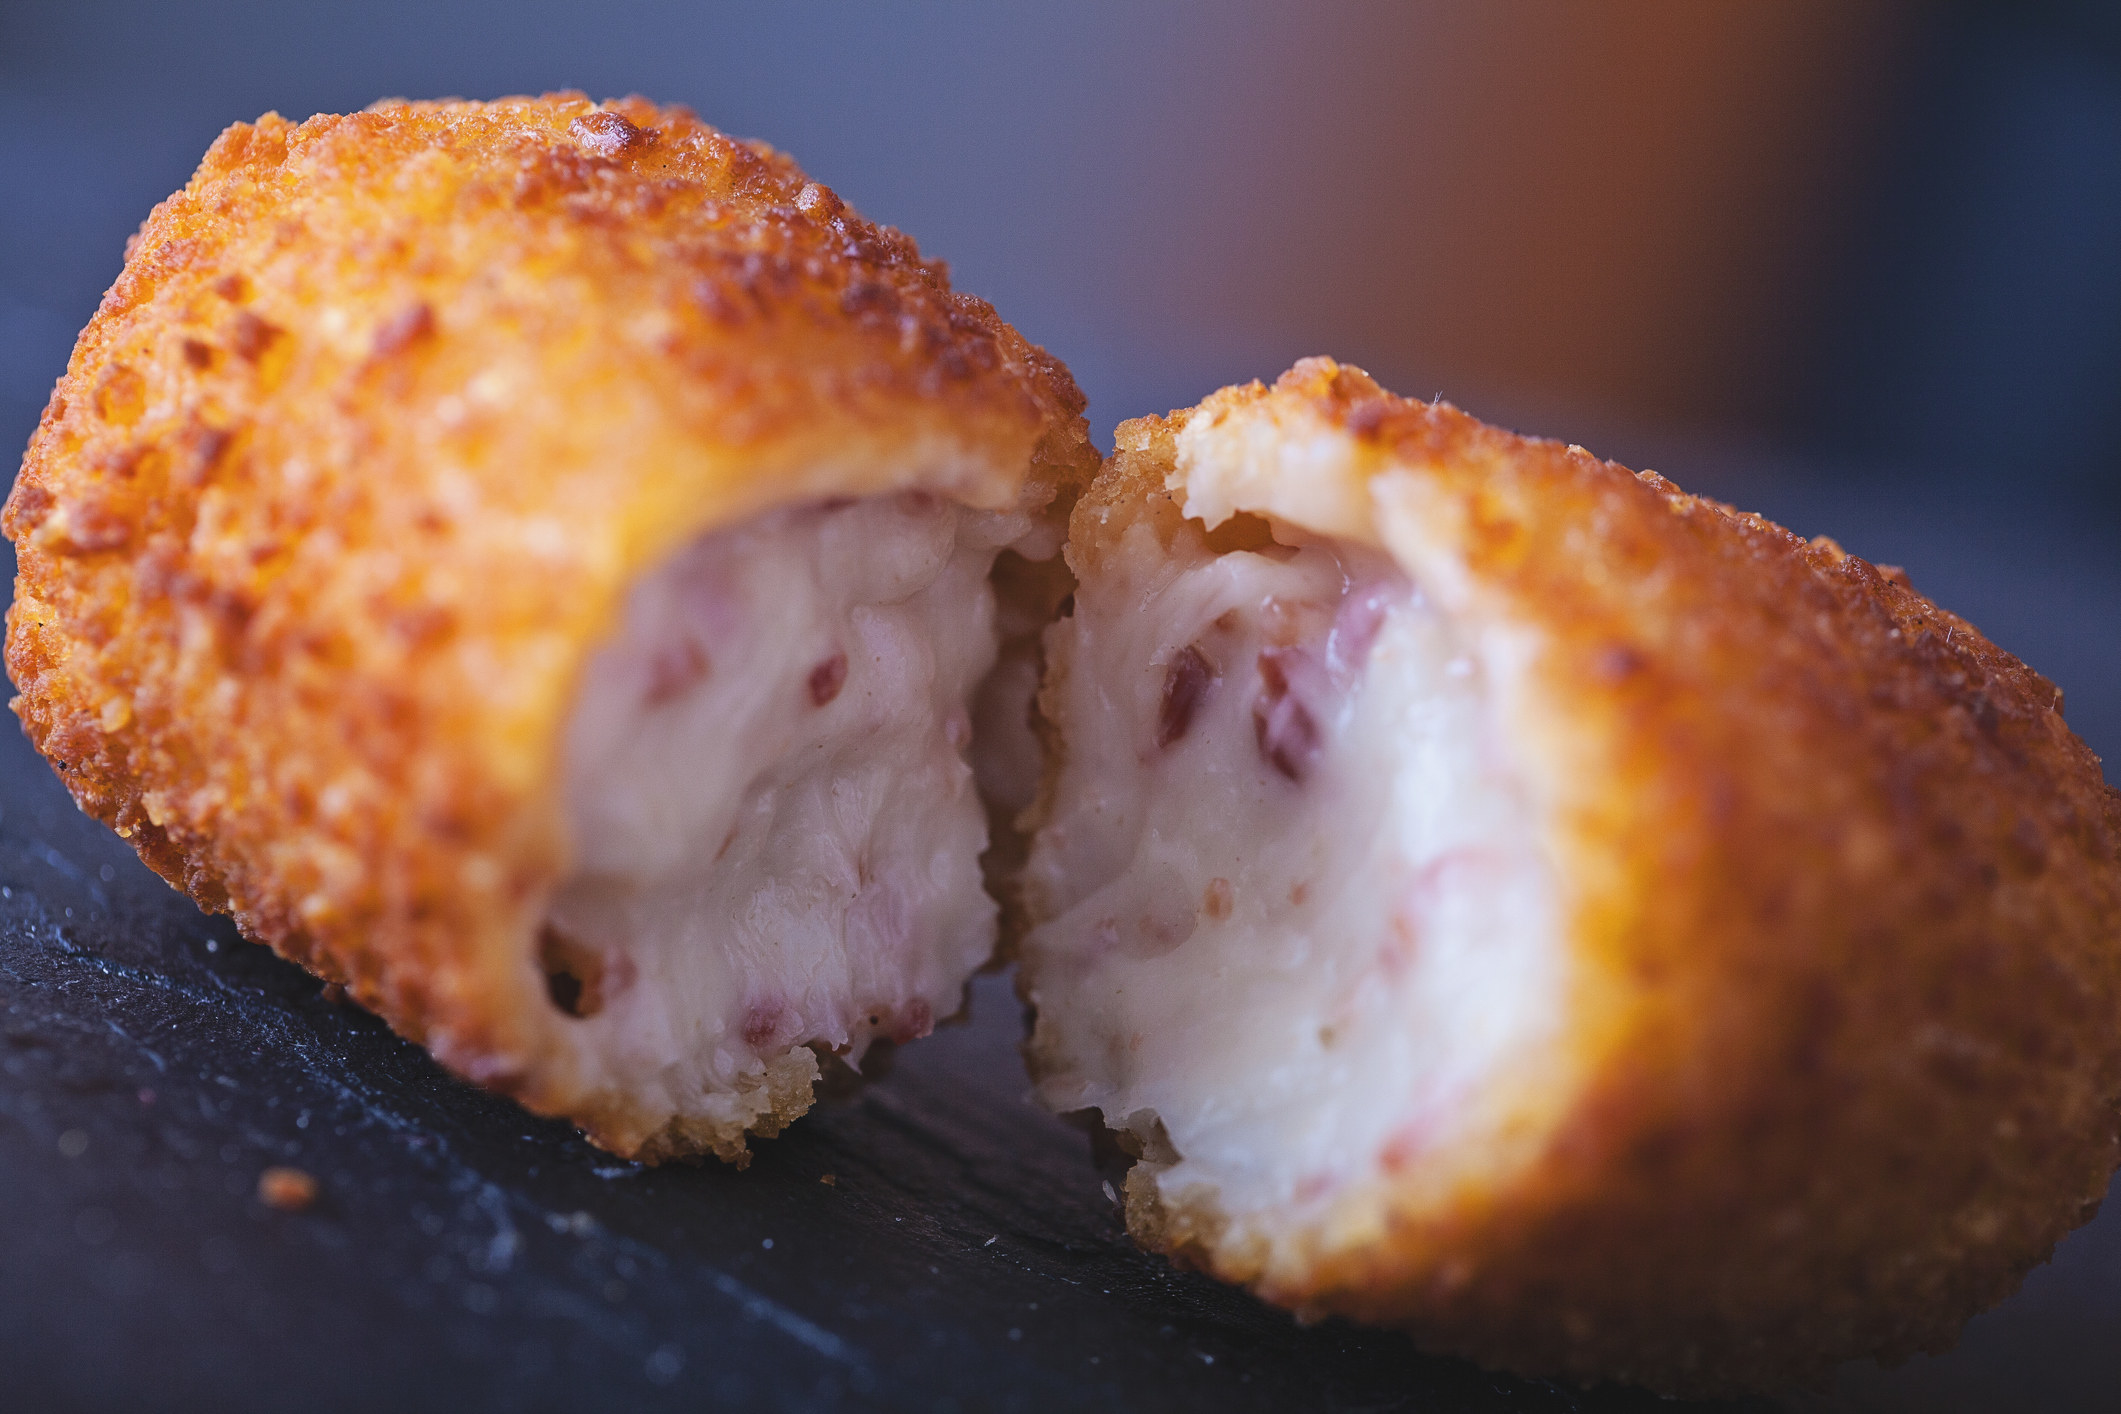 A Spanish croquettes